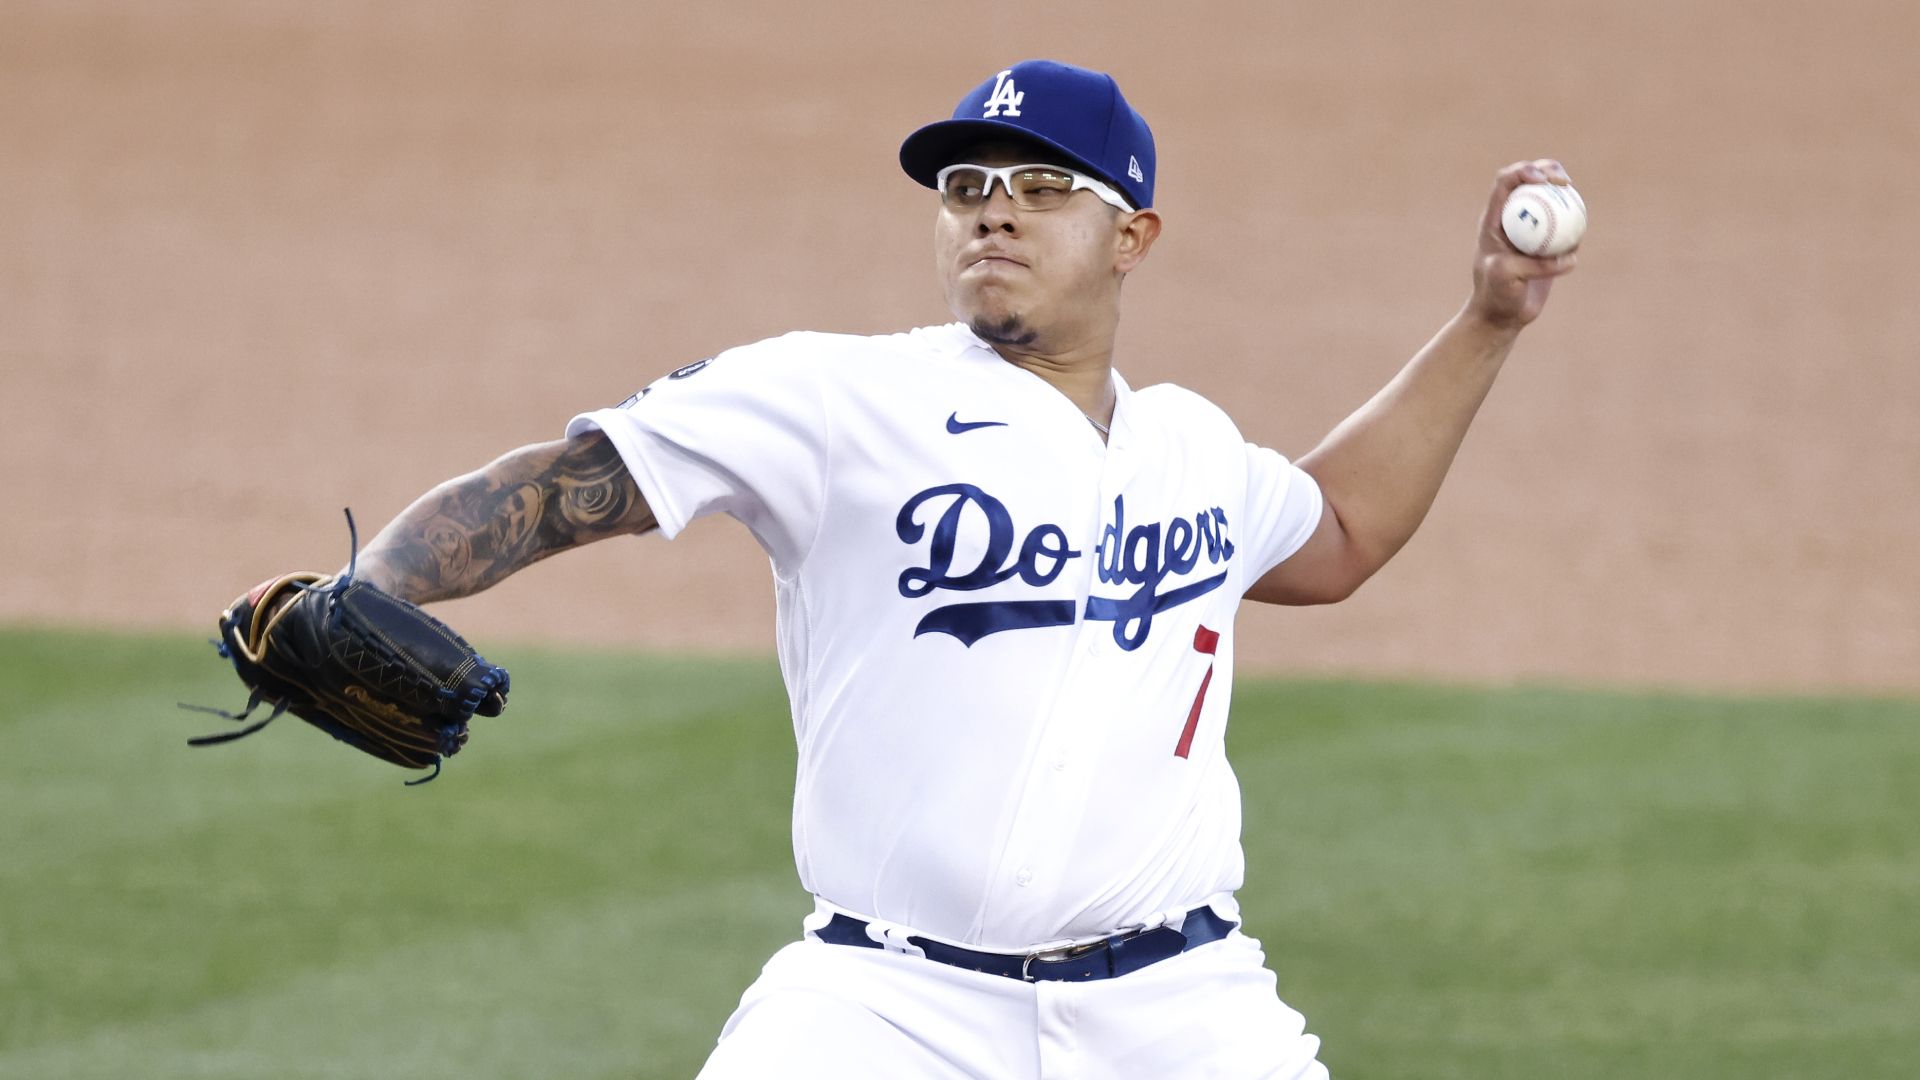 Urias, pitcher for the Dodgers, has been arrested for allegedly committing felony domestic violence